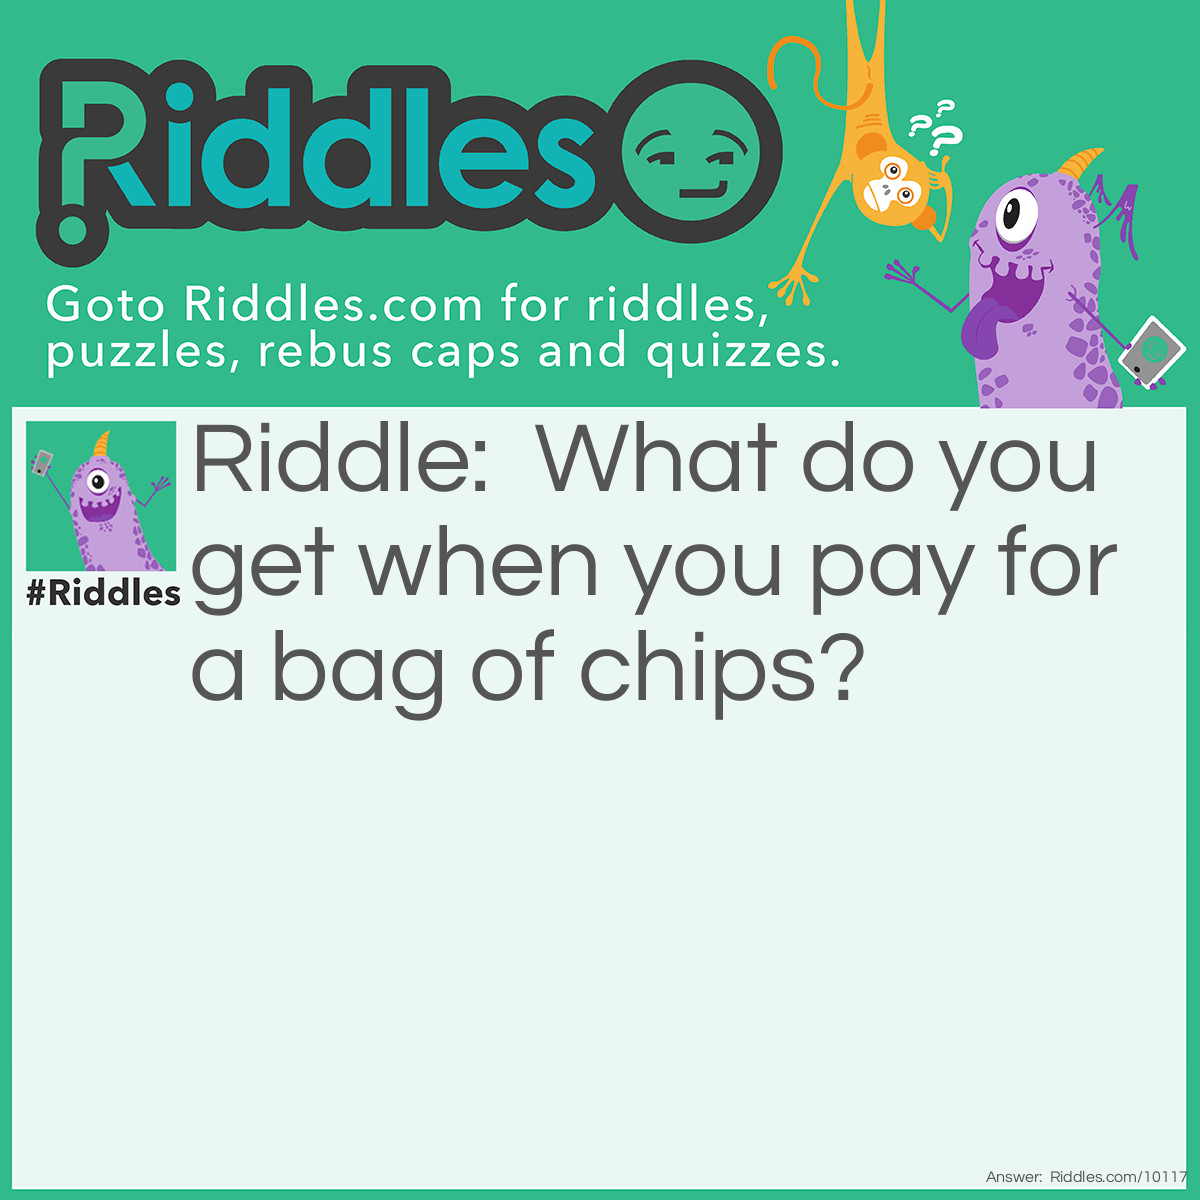 Riddle: What do you get when you pay for a bag of chips? Answer: Air.